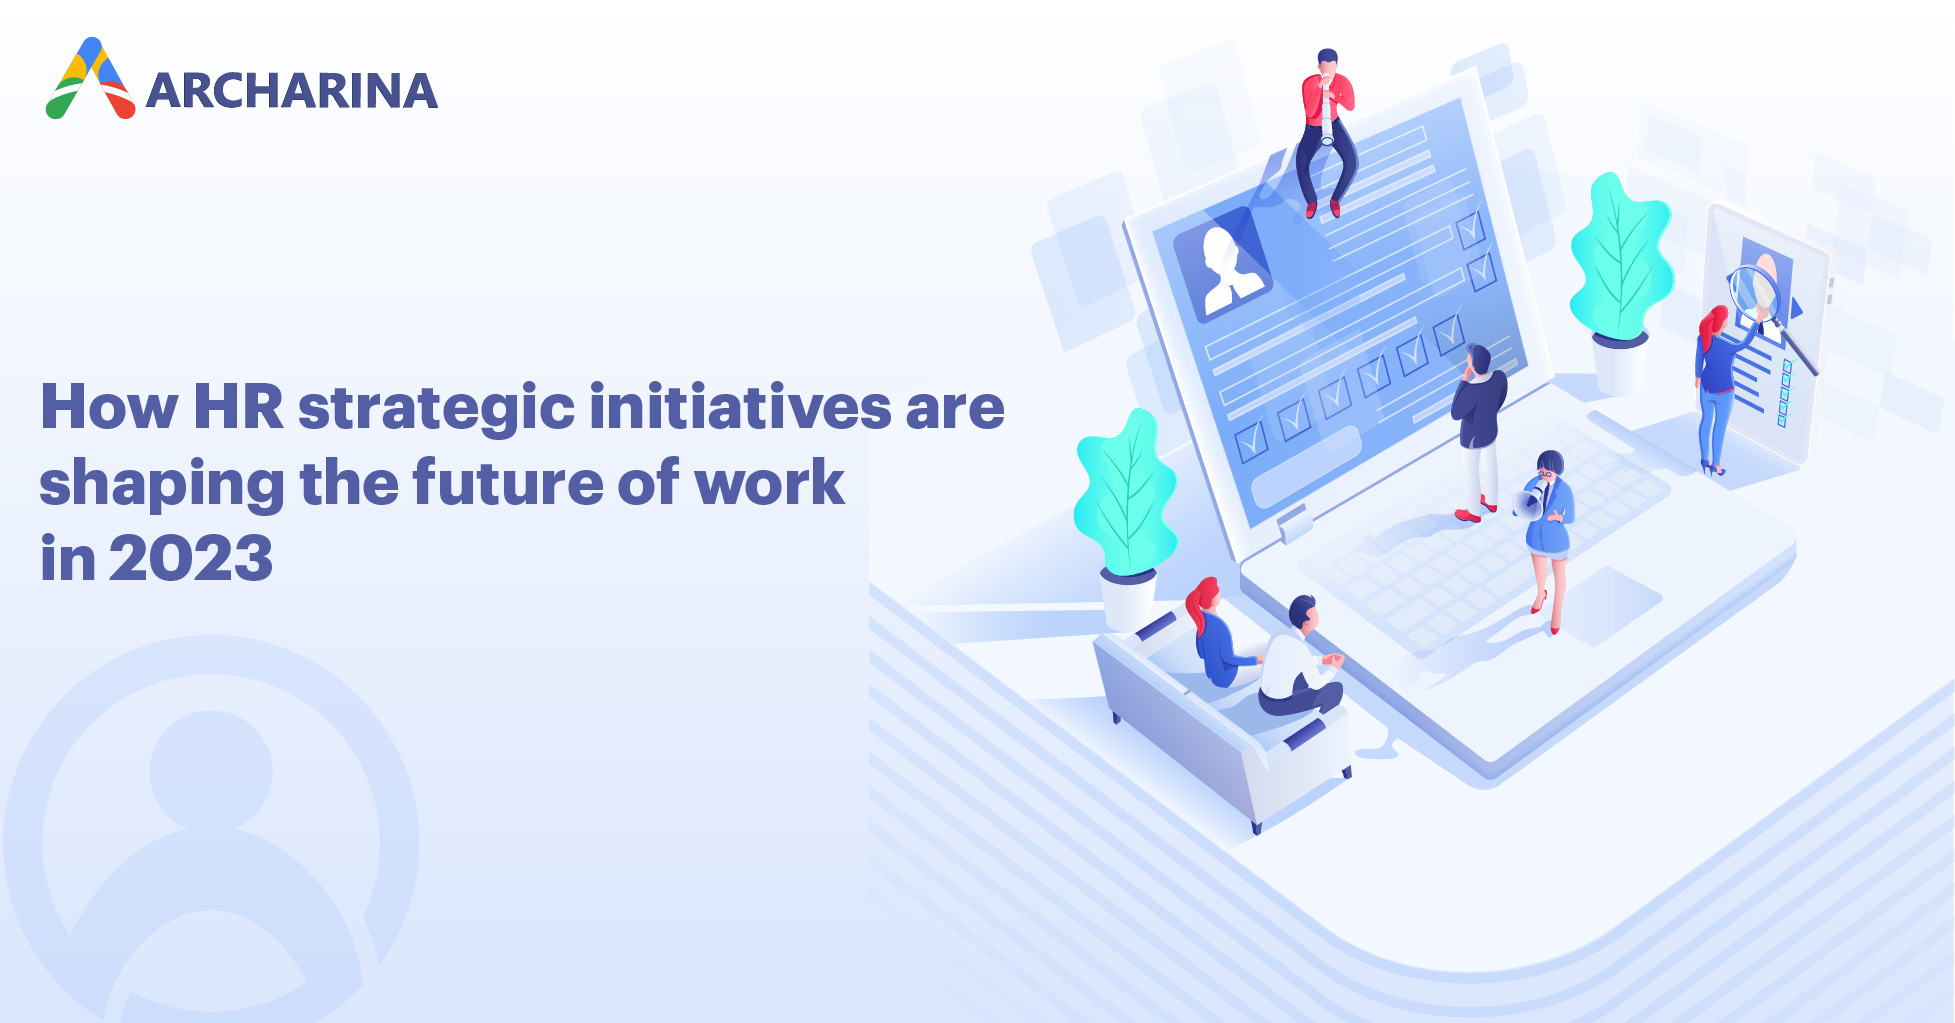 How HR strategic initiatives are shaping the future of work in 2023